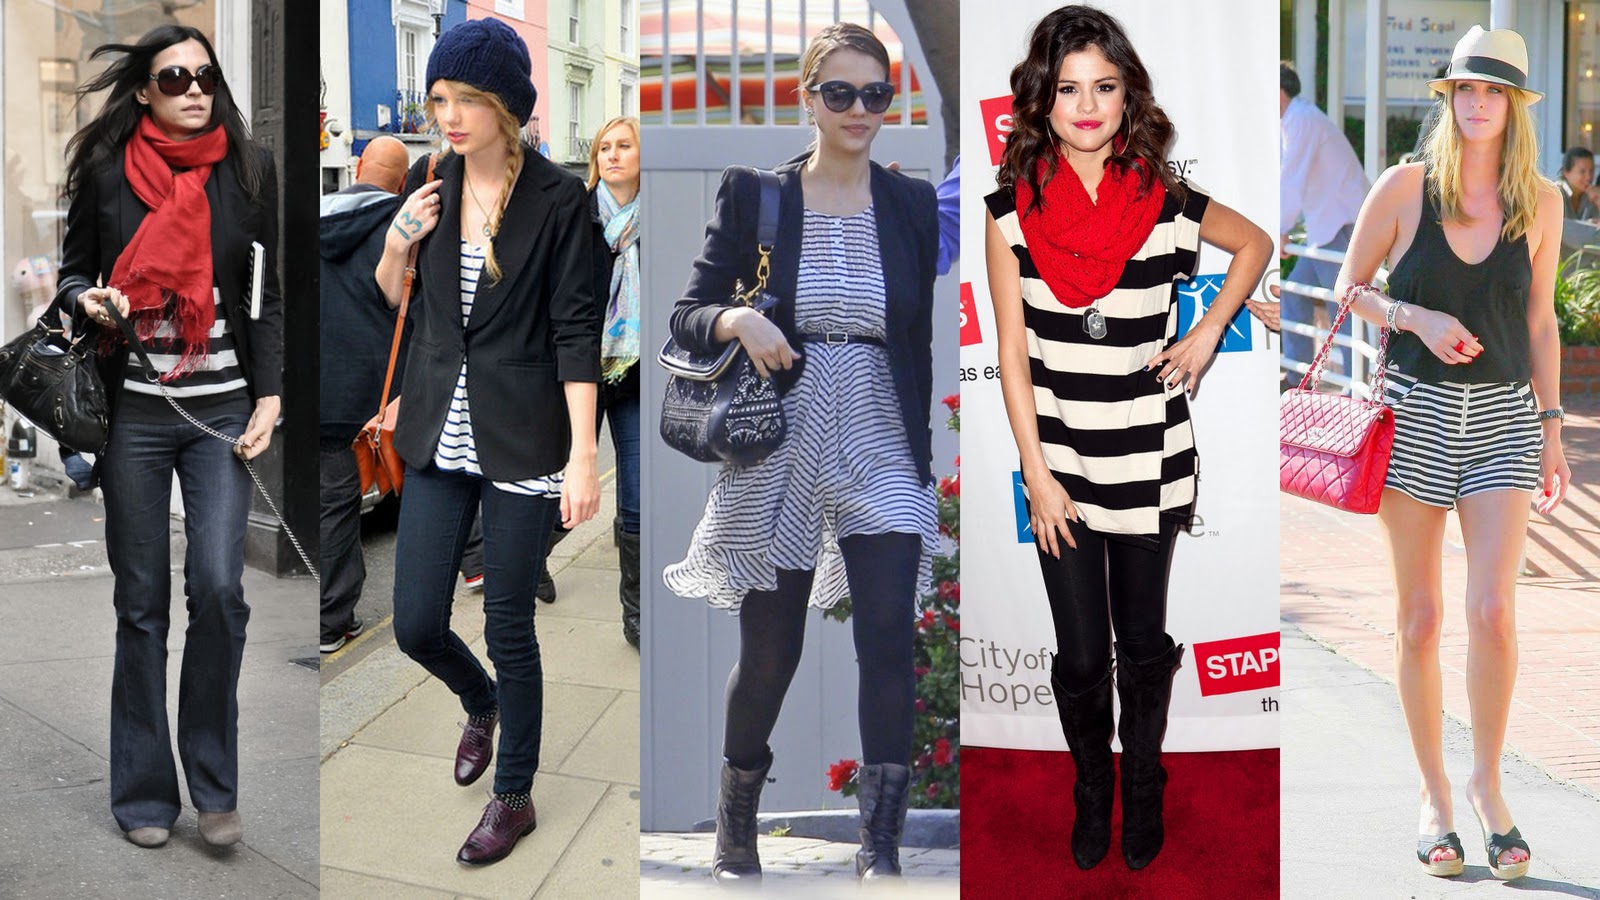 Frills and Thrills: Looks of the Week - 08/03/14